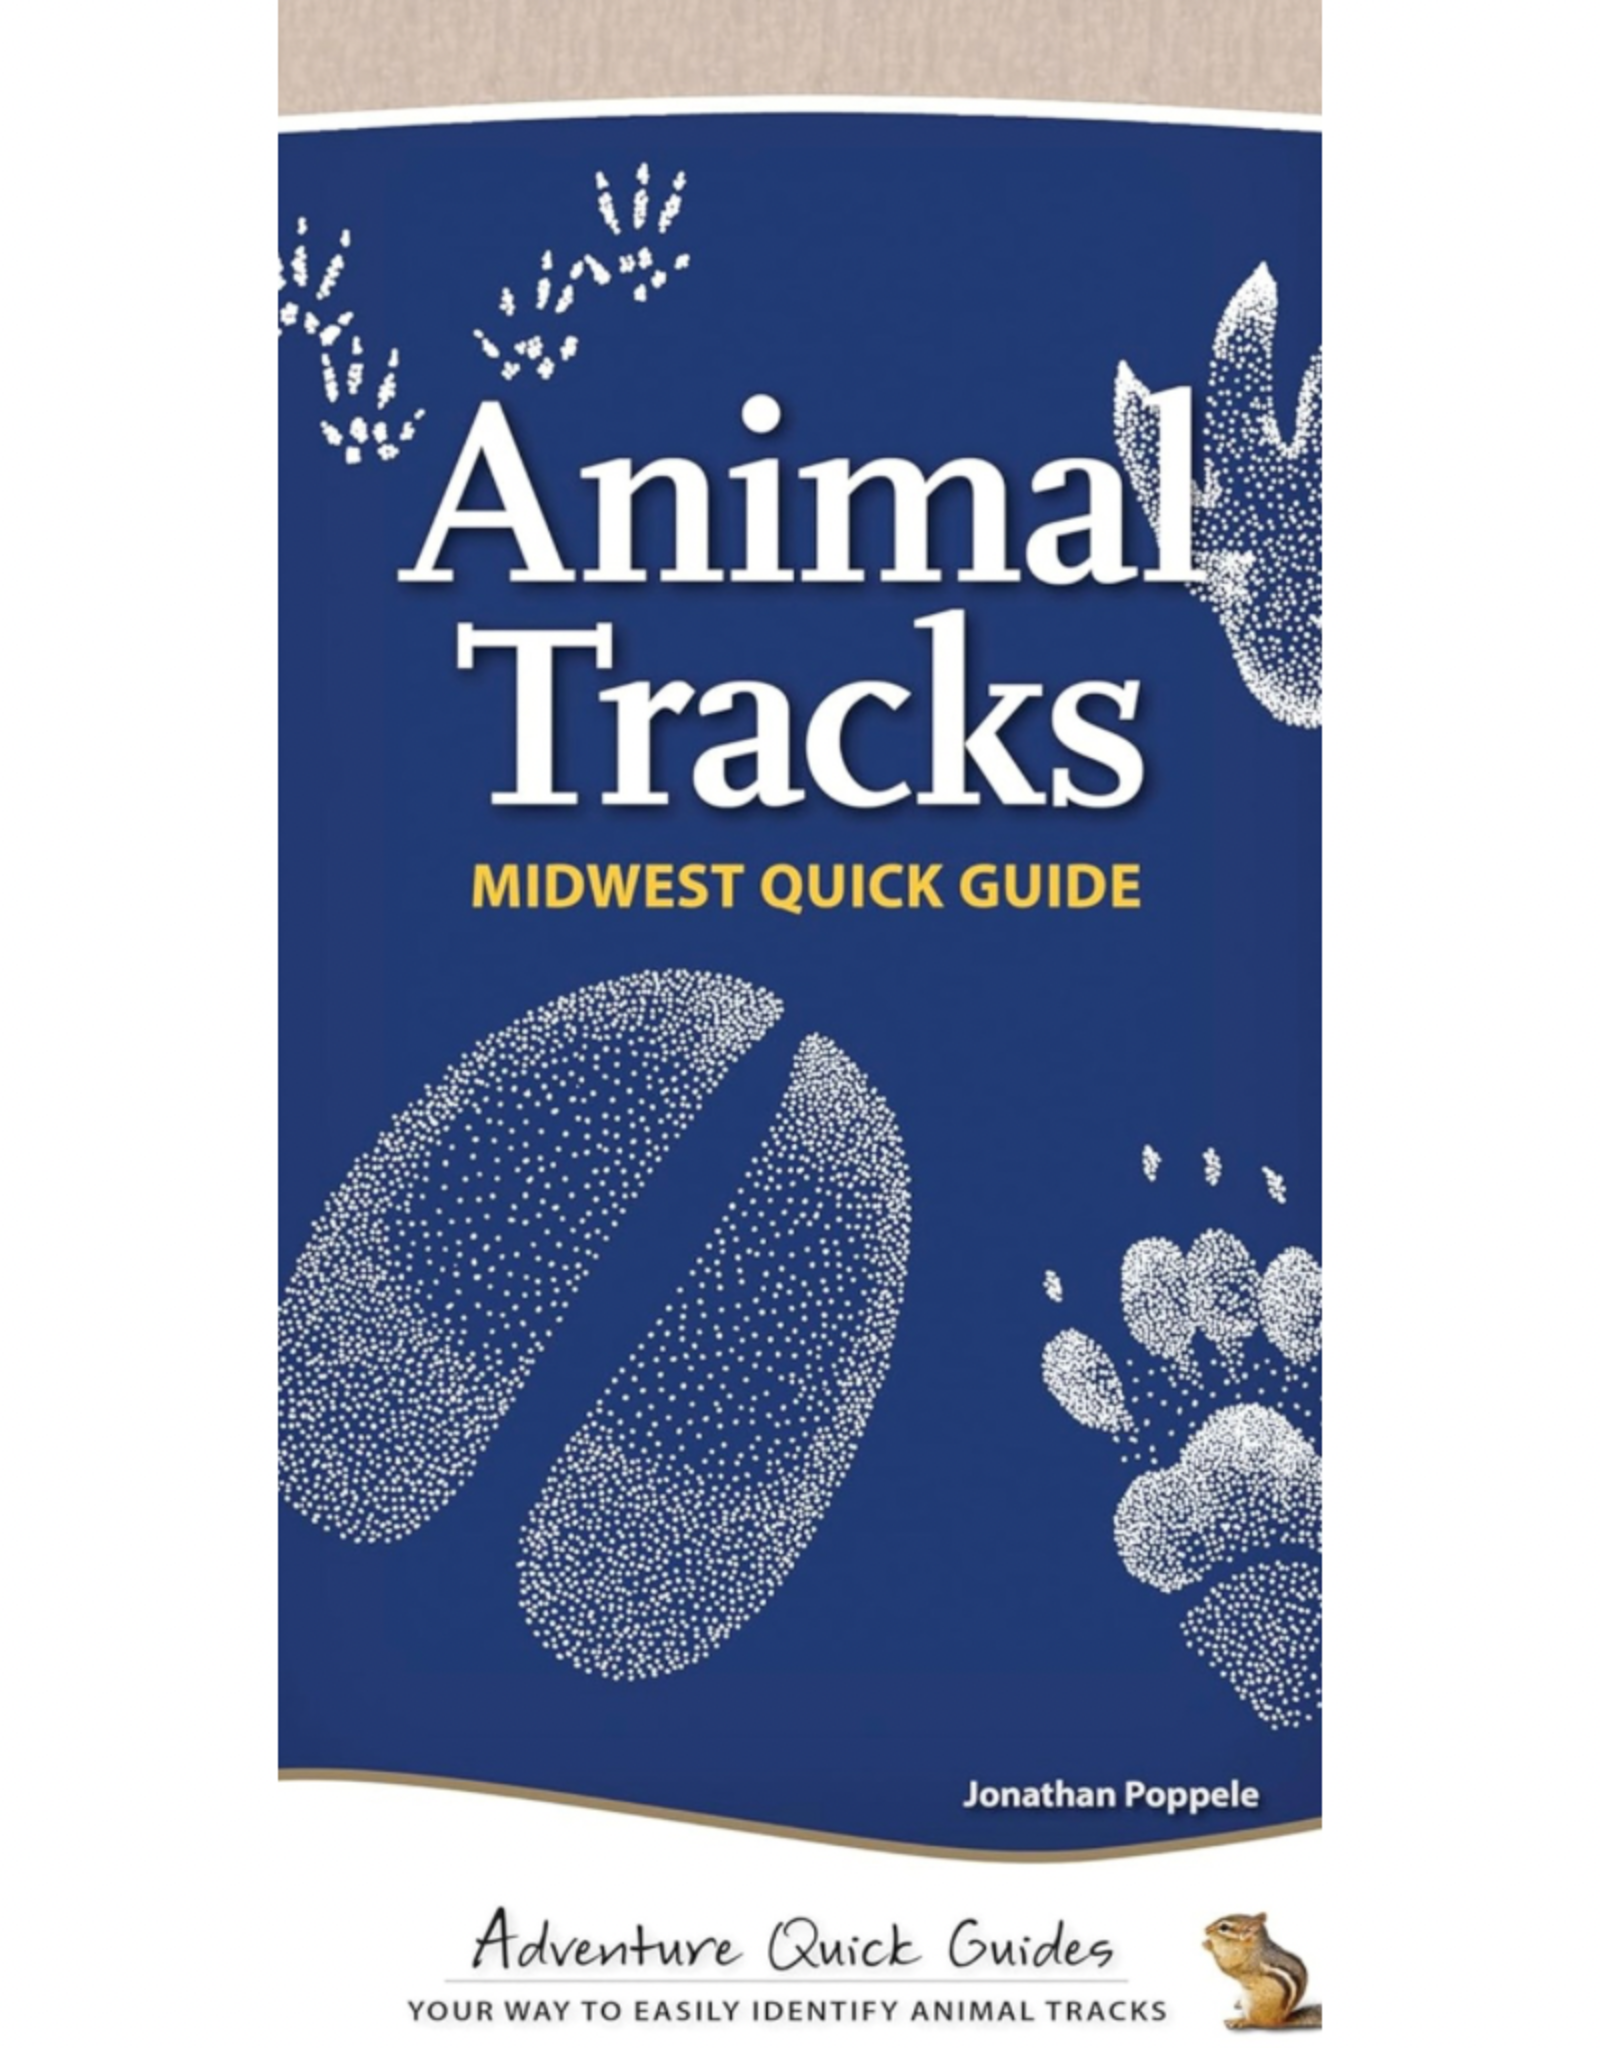 Animal Tracks: Midwest Quick Guide